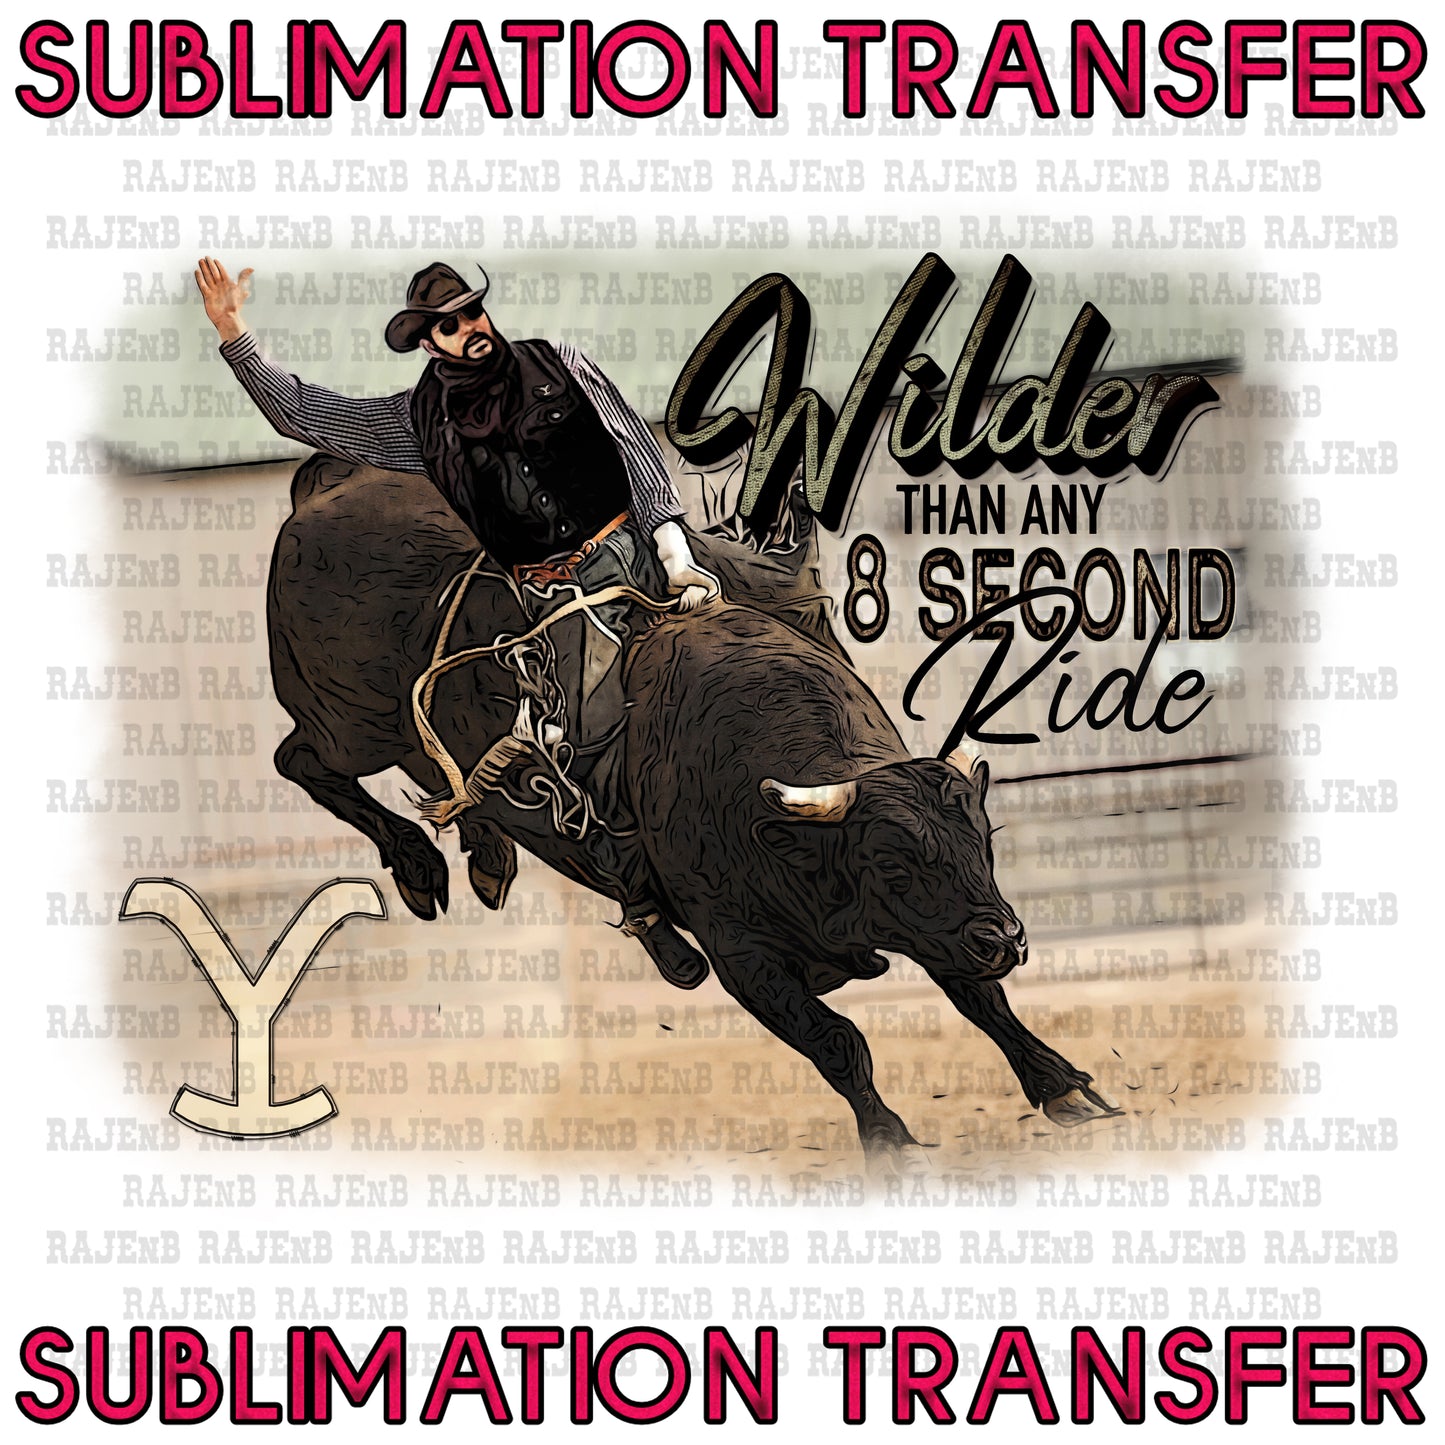 Wilder than any 8 second ride RIP - SUBLIMATION TRANSFER 4043SUB